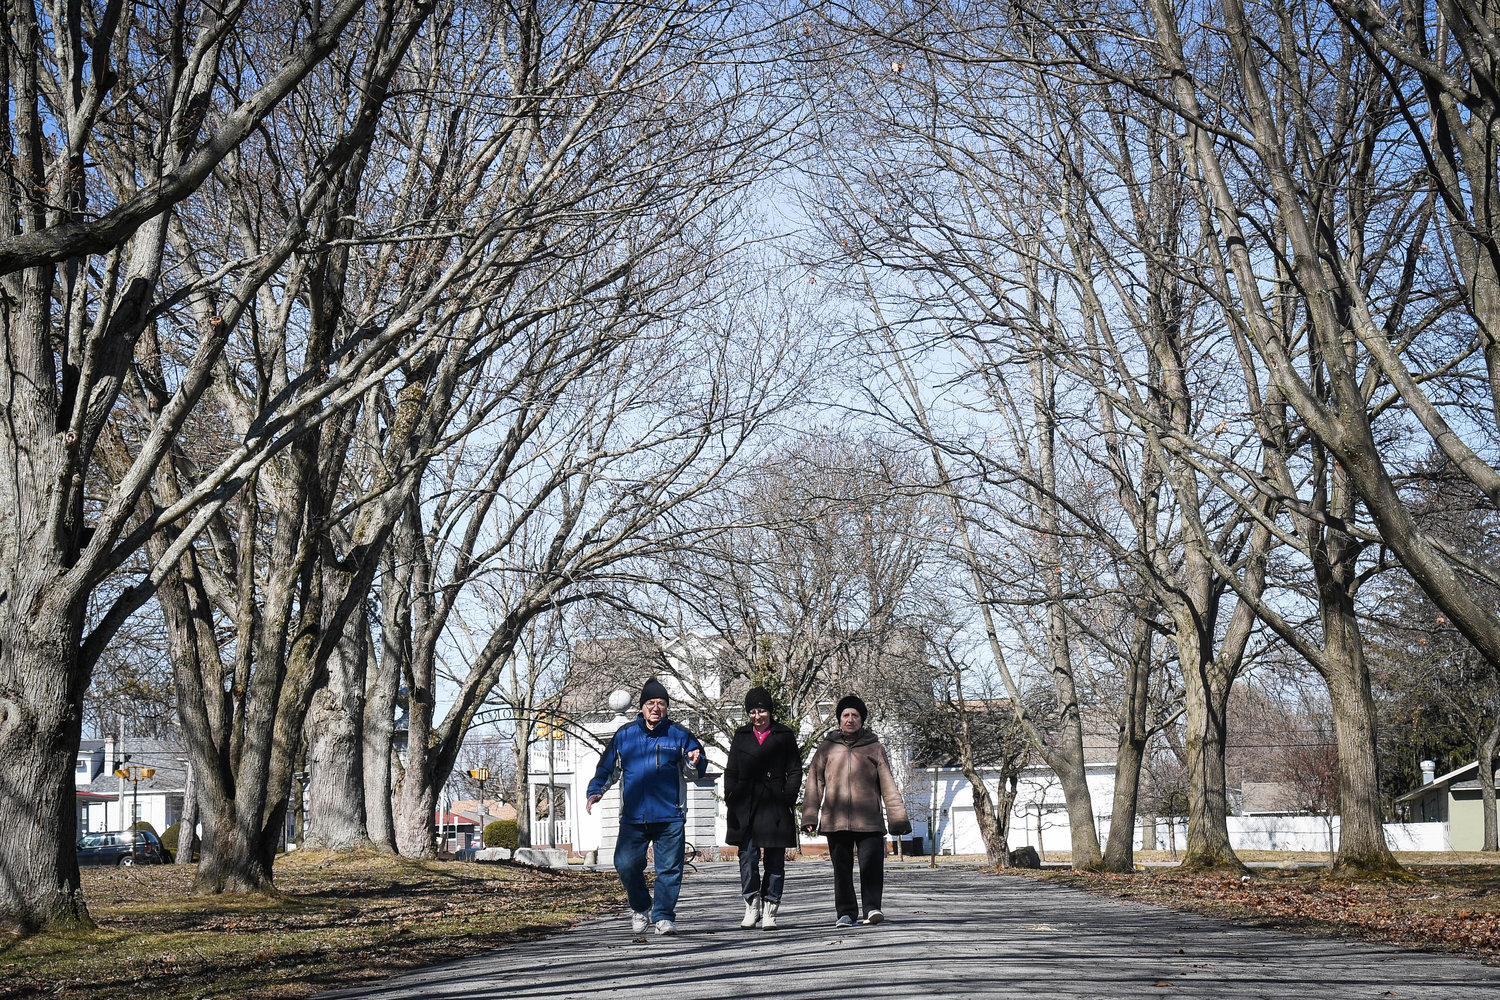 NICE DAY FOR A WALK — Park goers go for a walk on a sunny day at F.T. Proctor Park in Utica earlier this spring.  The Central New York Conservancy, which advocates on behalf of the city’s Olmstead parks including F.T. Proctor Park, has appointed a new executive director.